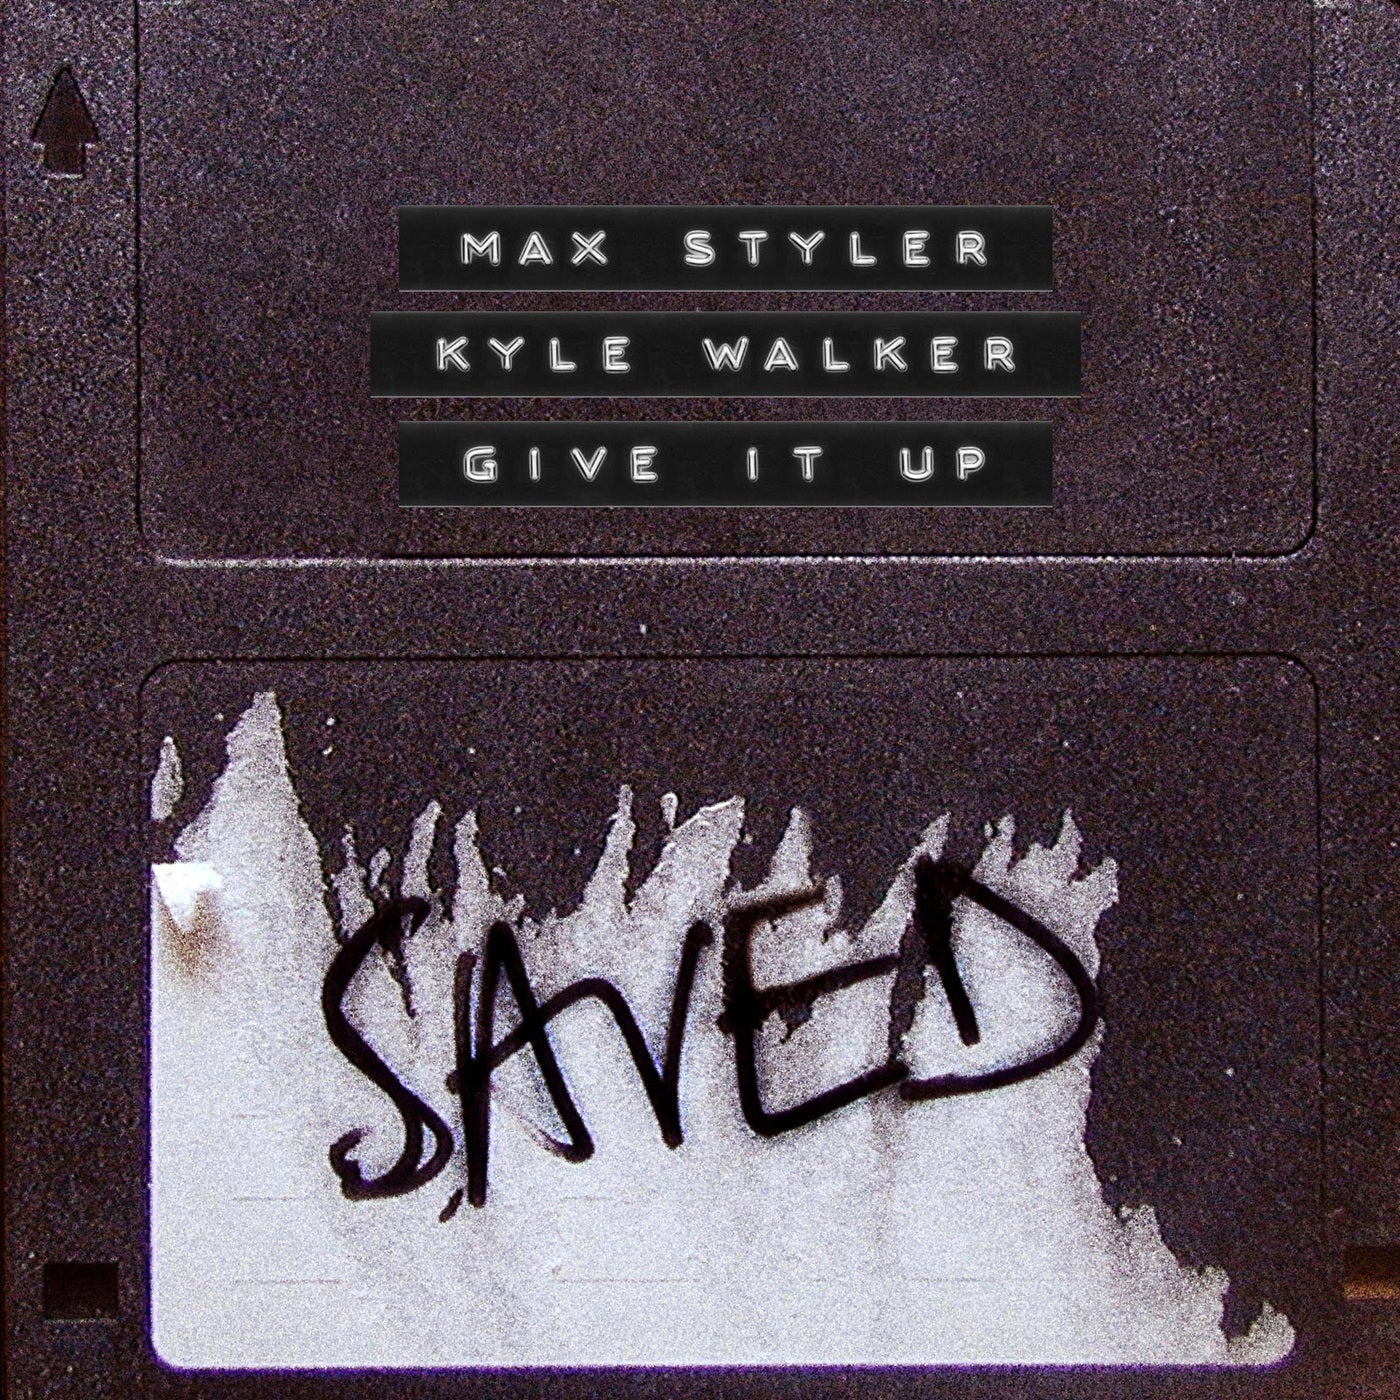 Max Styler, Kyle Walker - Give It Up [SAVED25901Z]